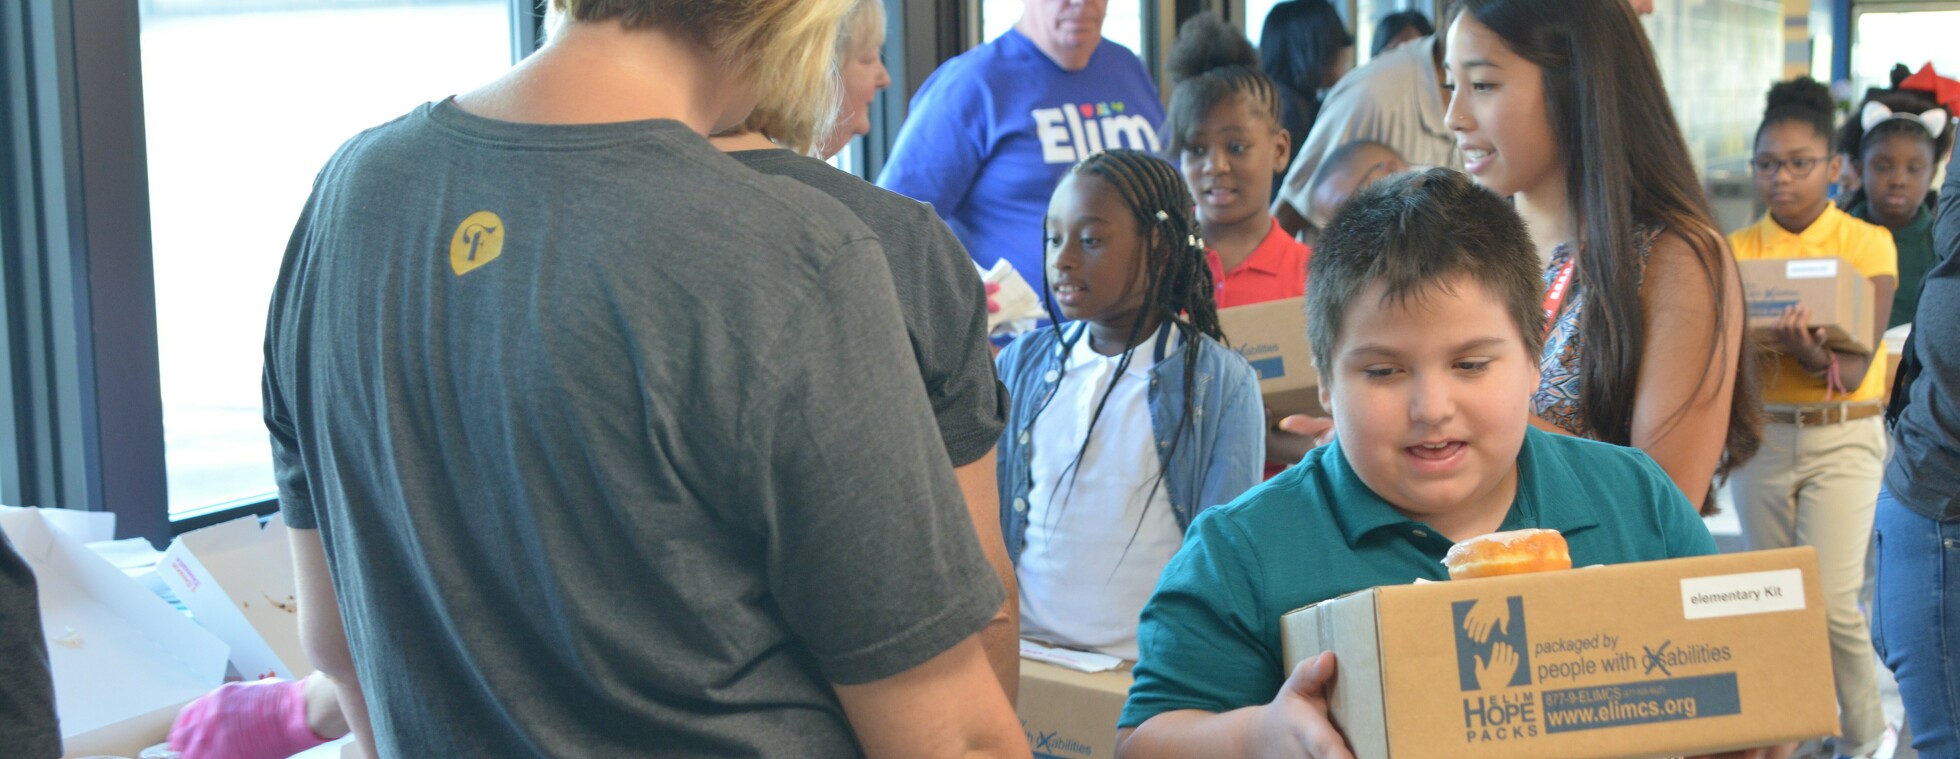 Elim HOPE Packs-Chicagoland Prison Outreach Families